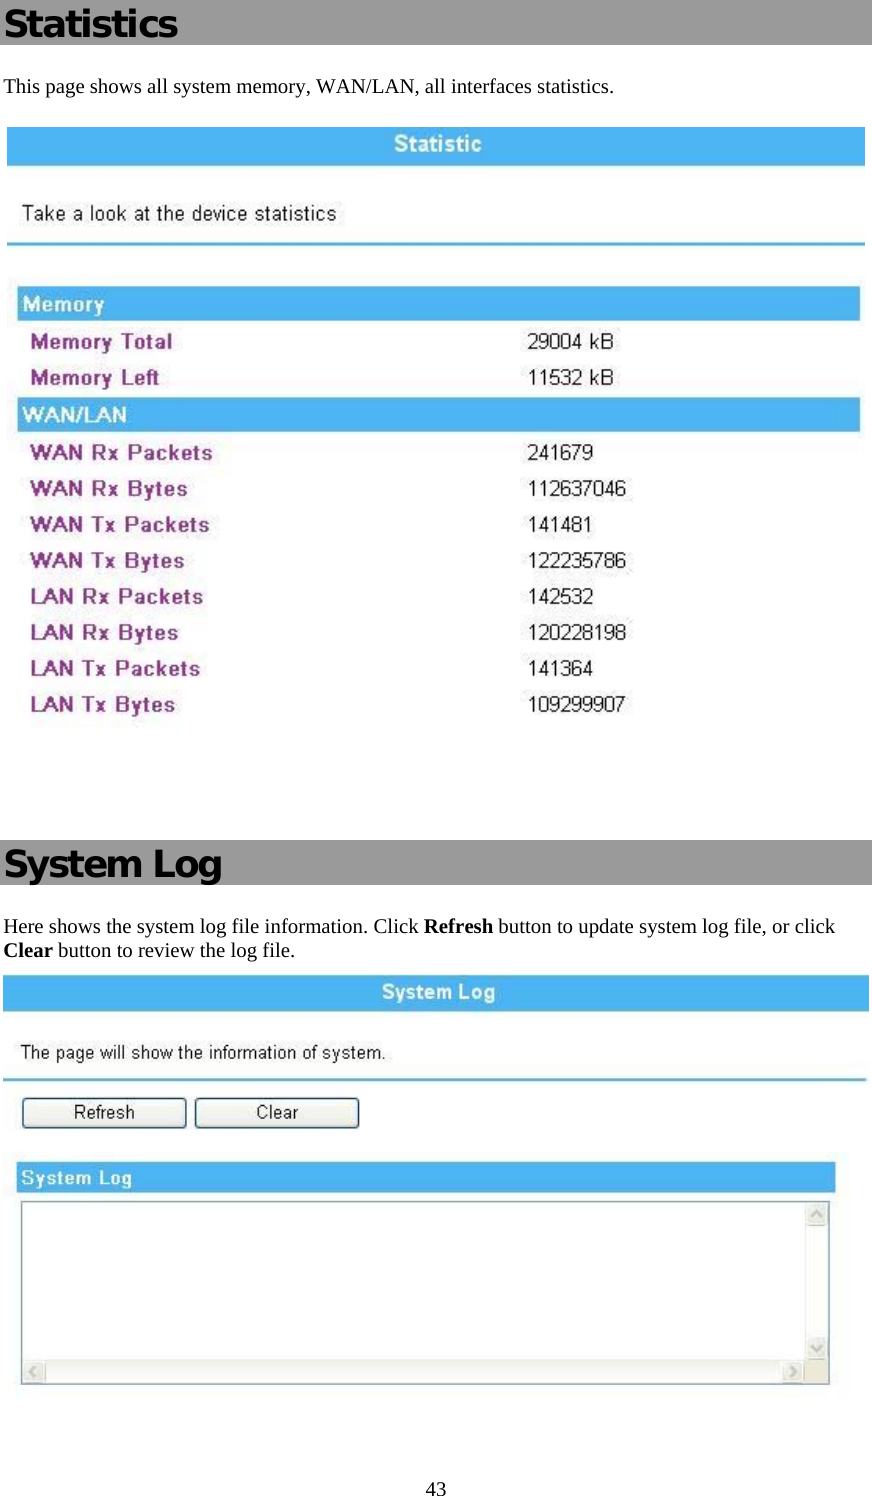   43Statistics This page shows all system memory, WAN/LAN, all interfaces statistics.    System Log Here shows the system log file information. Click Refresh button to update system log file, or click Clear button to review the log file.          